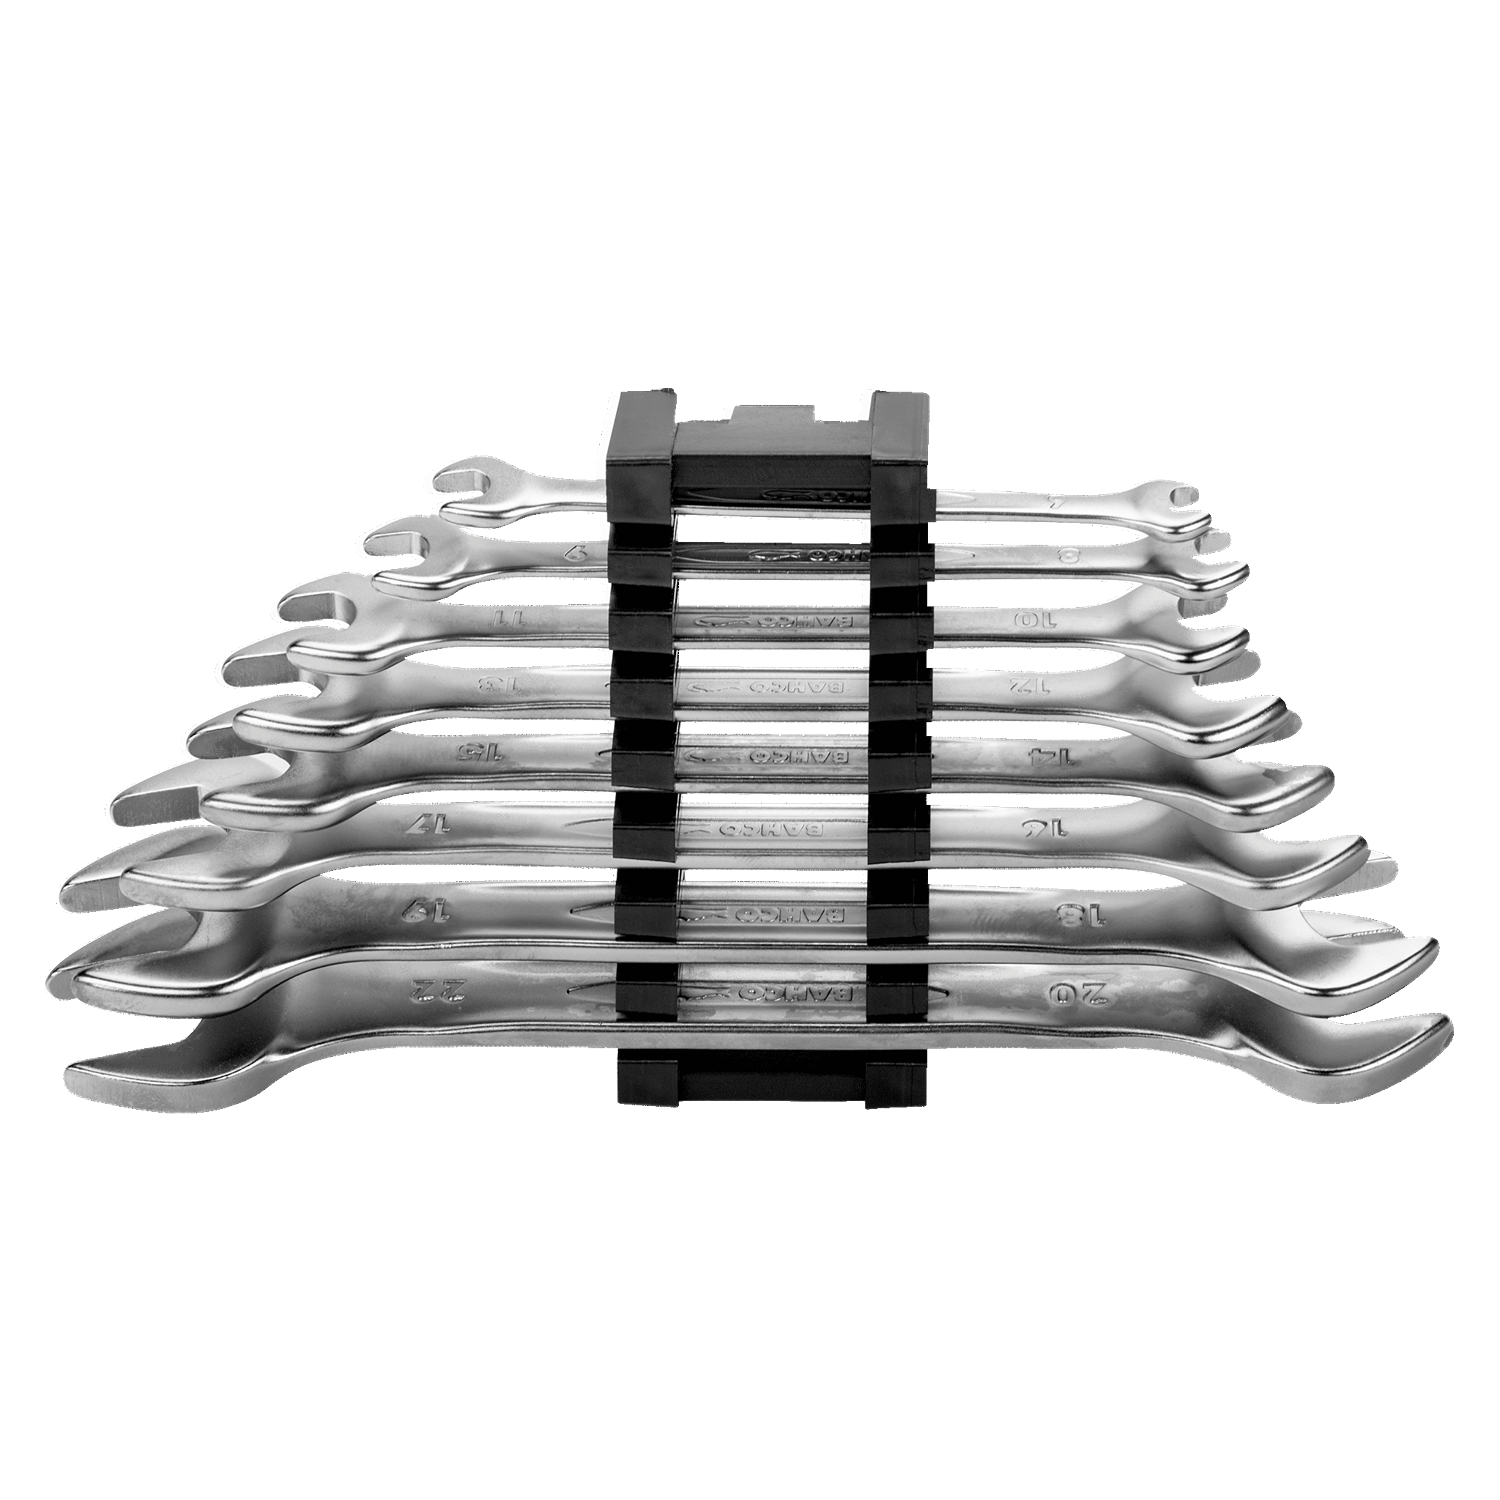 BAHCO 6M/8C Metric Double Open Ended Wrench Set - 8 Pcs - Premium Double Open Ended Wrench Set from BAHCO - Shop now at Yew Aik.